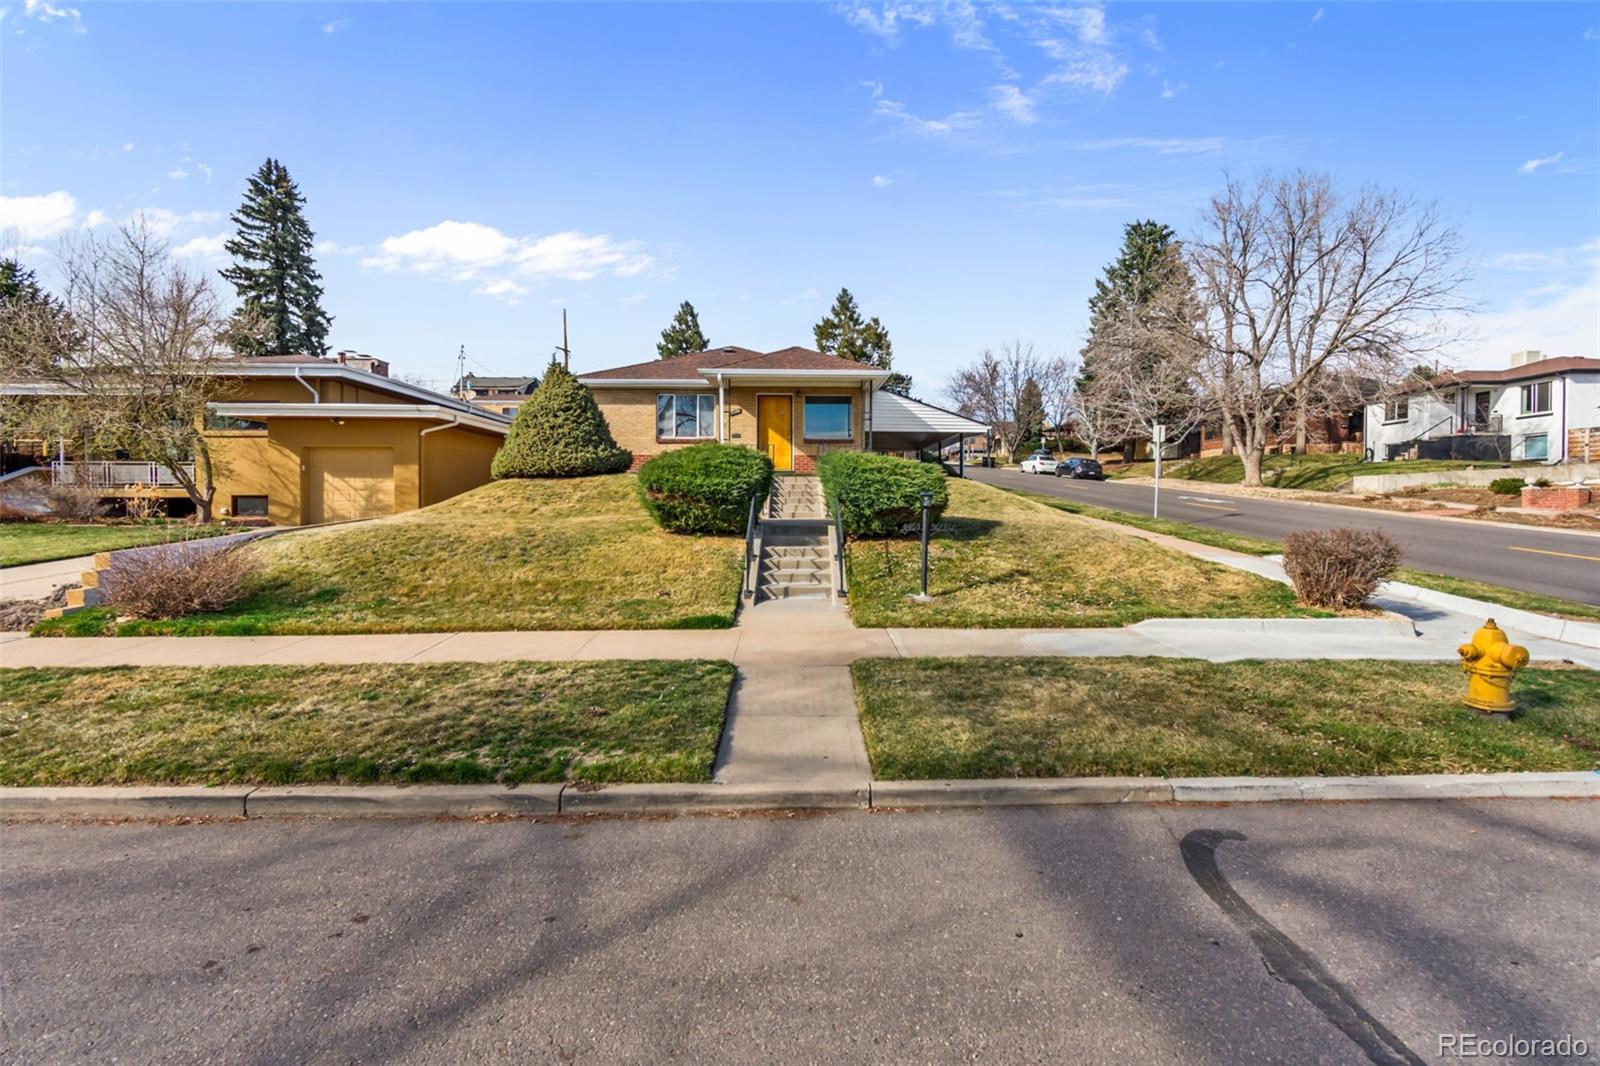 4401 w 31st avenue, Denver sold home. Closed on 2024-06-06 for $1,122,000.